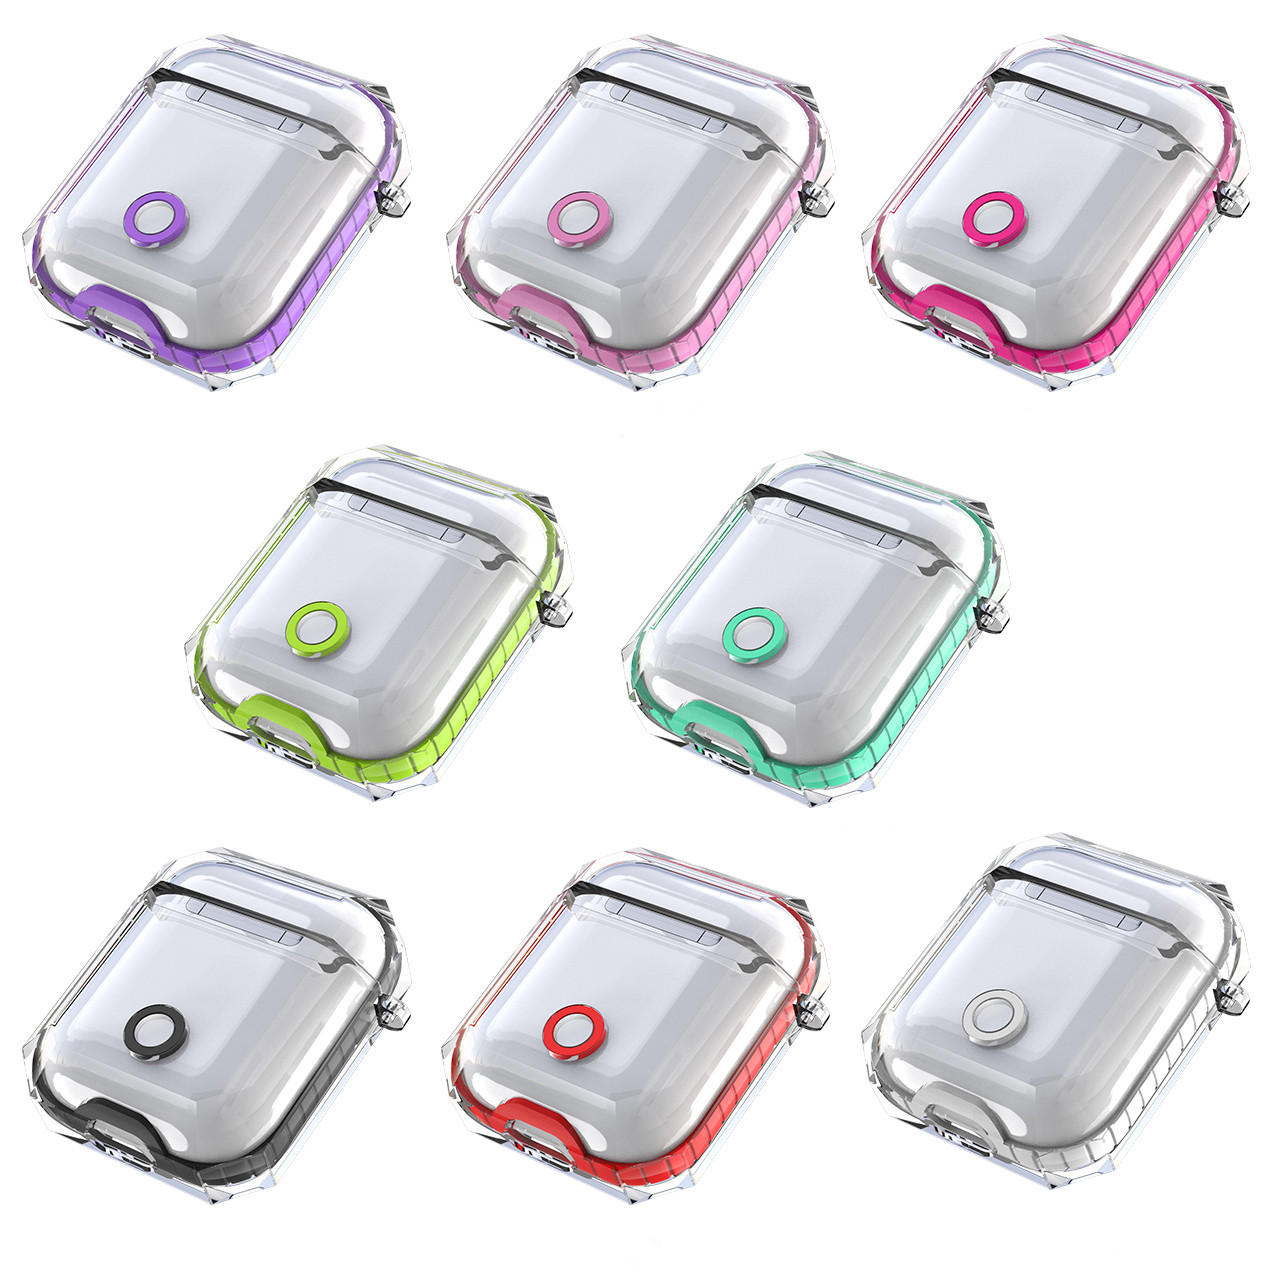 Bakeey Transparent Soft TPU Shockproof Non-slip Earphone Storage Case for Apple Airpods 1 / Apple AirPods 2